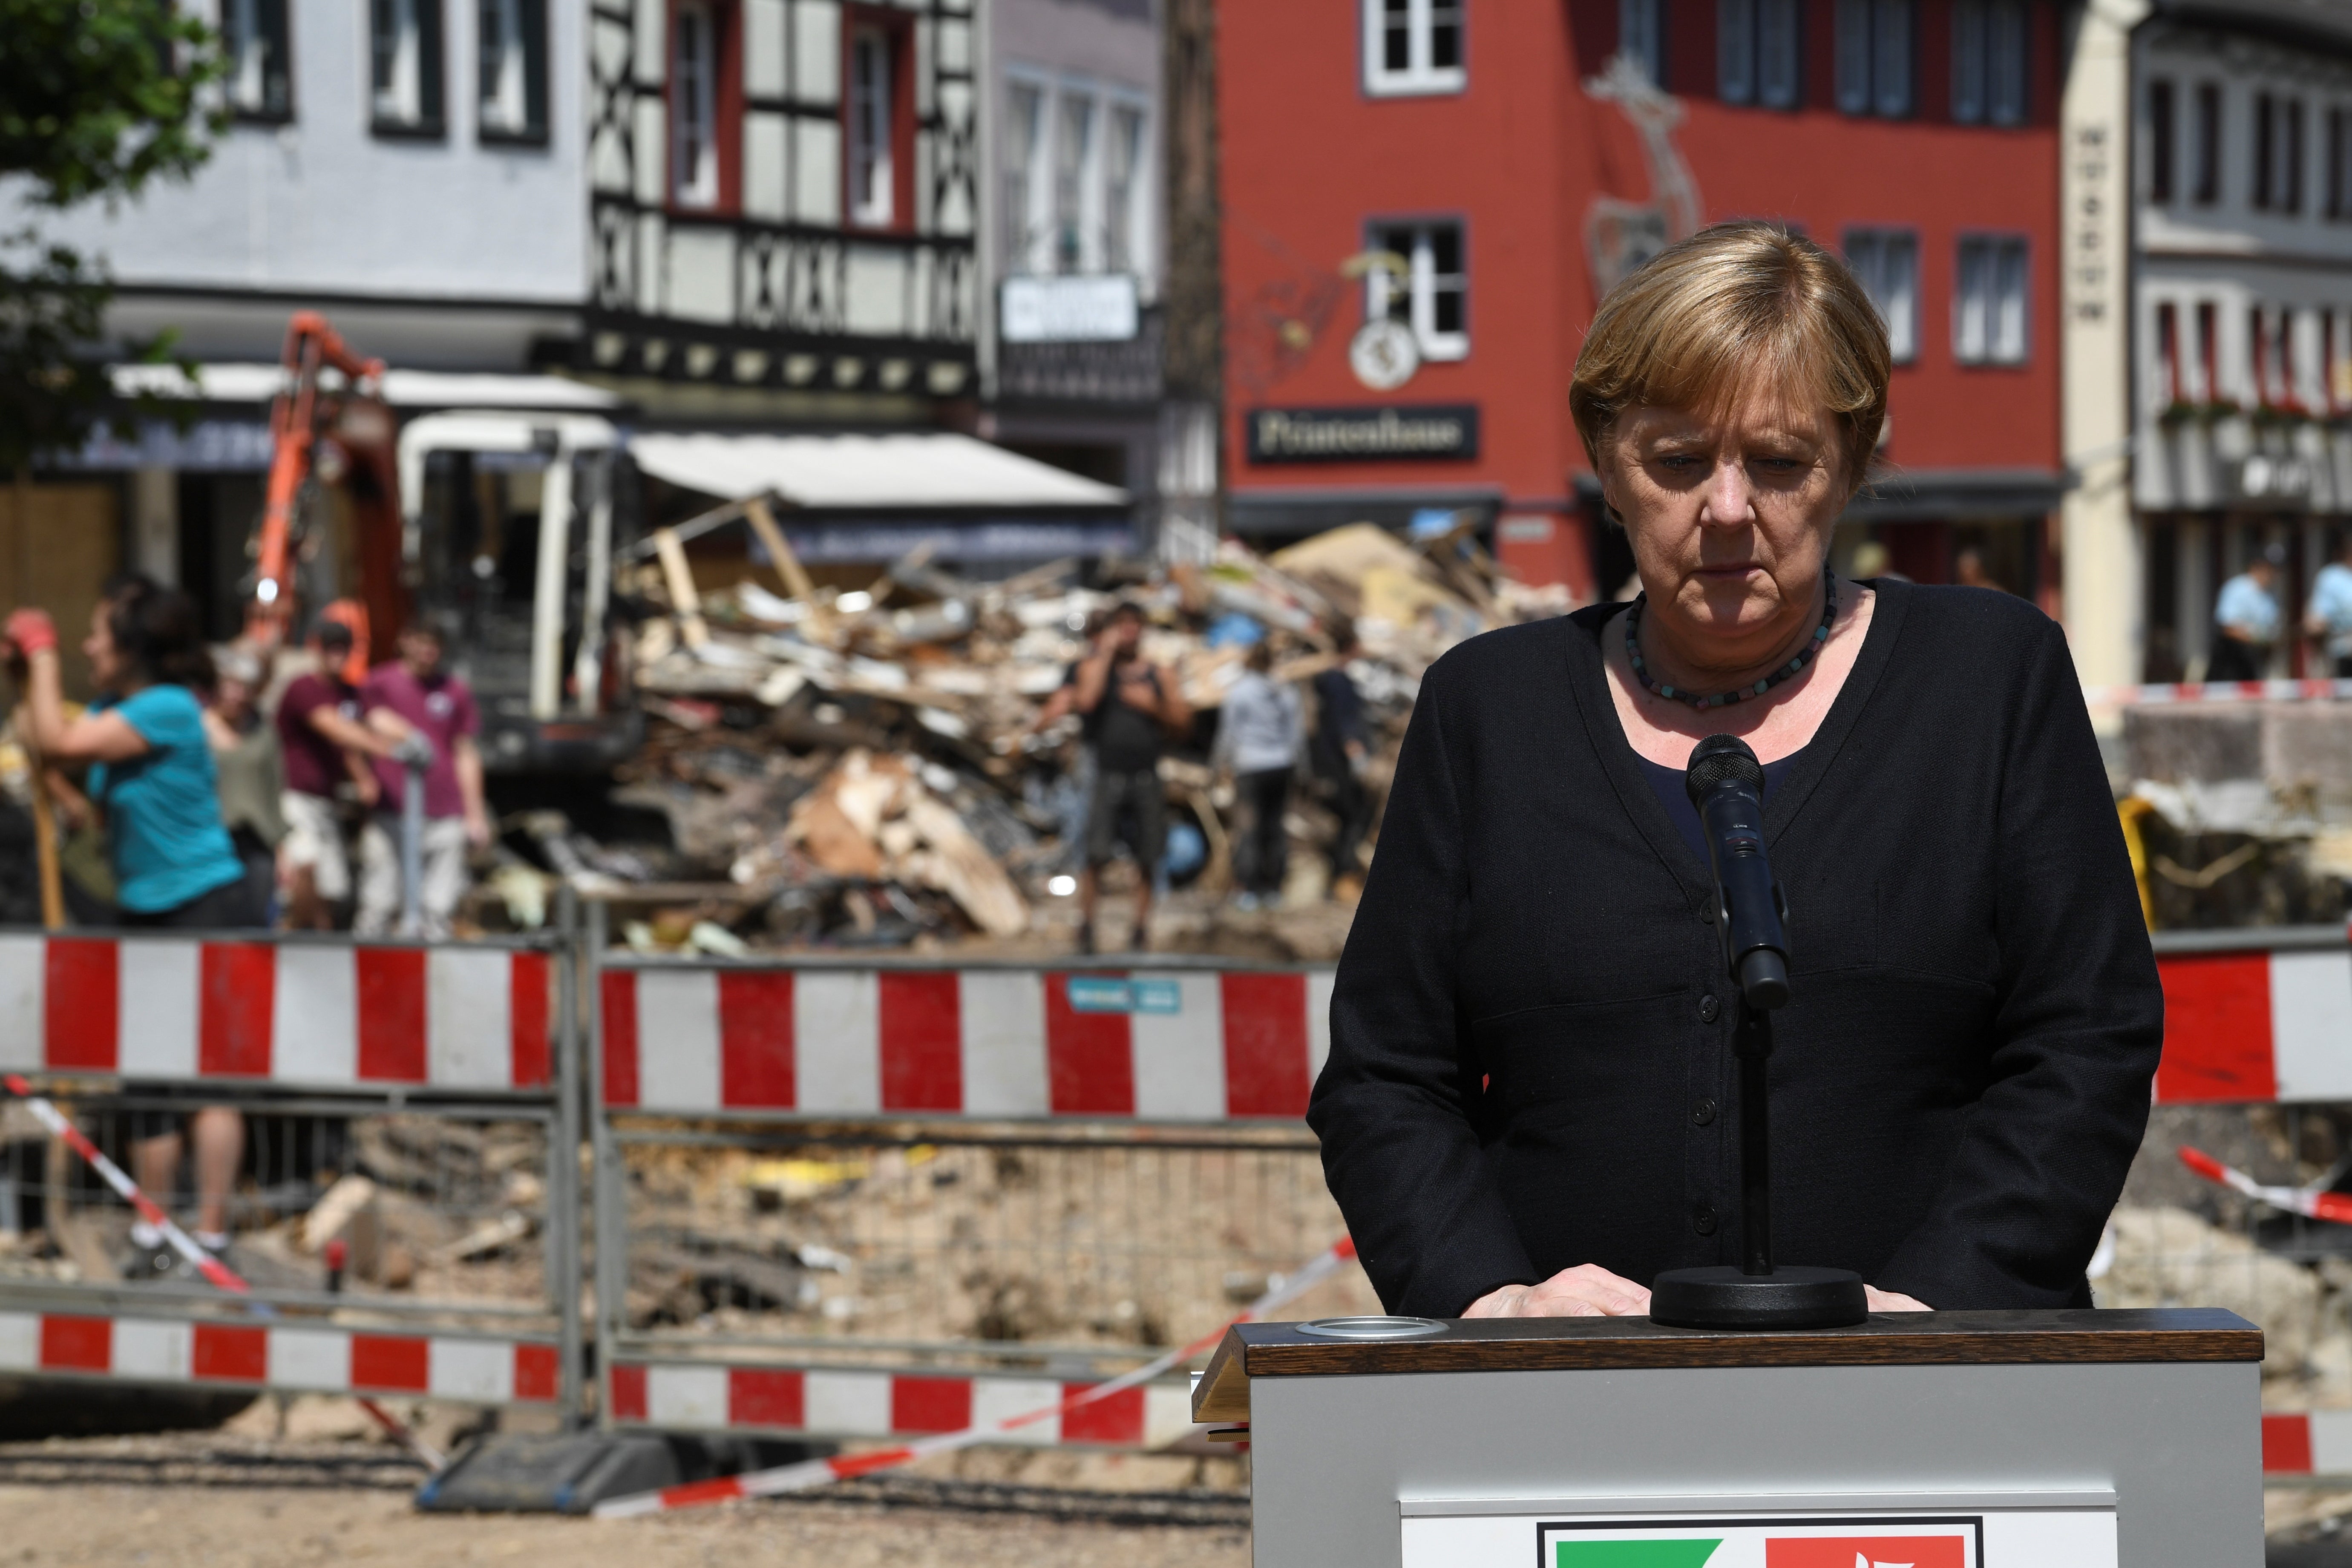 Angela Merkel pledged €500 million to victims of flash floods in Germany earlier this summer